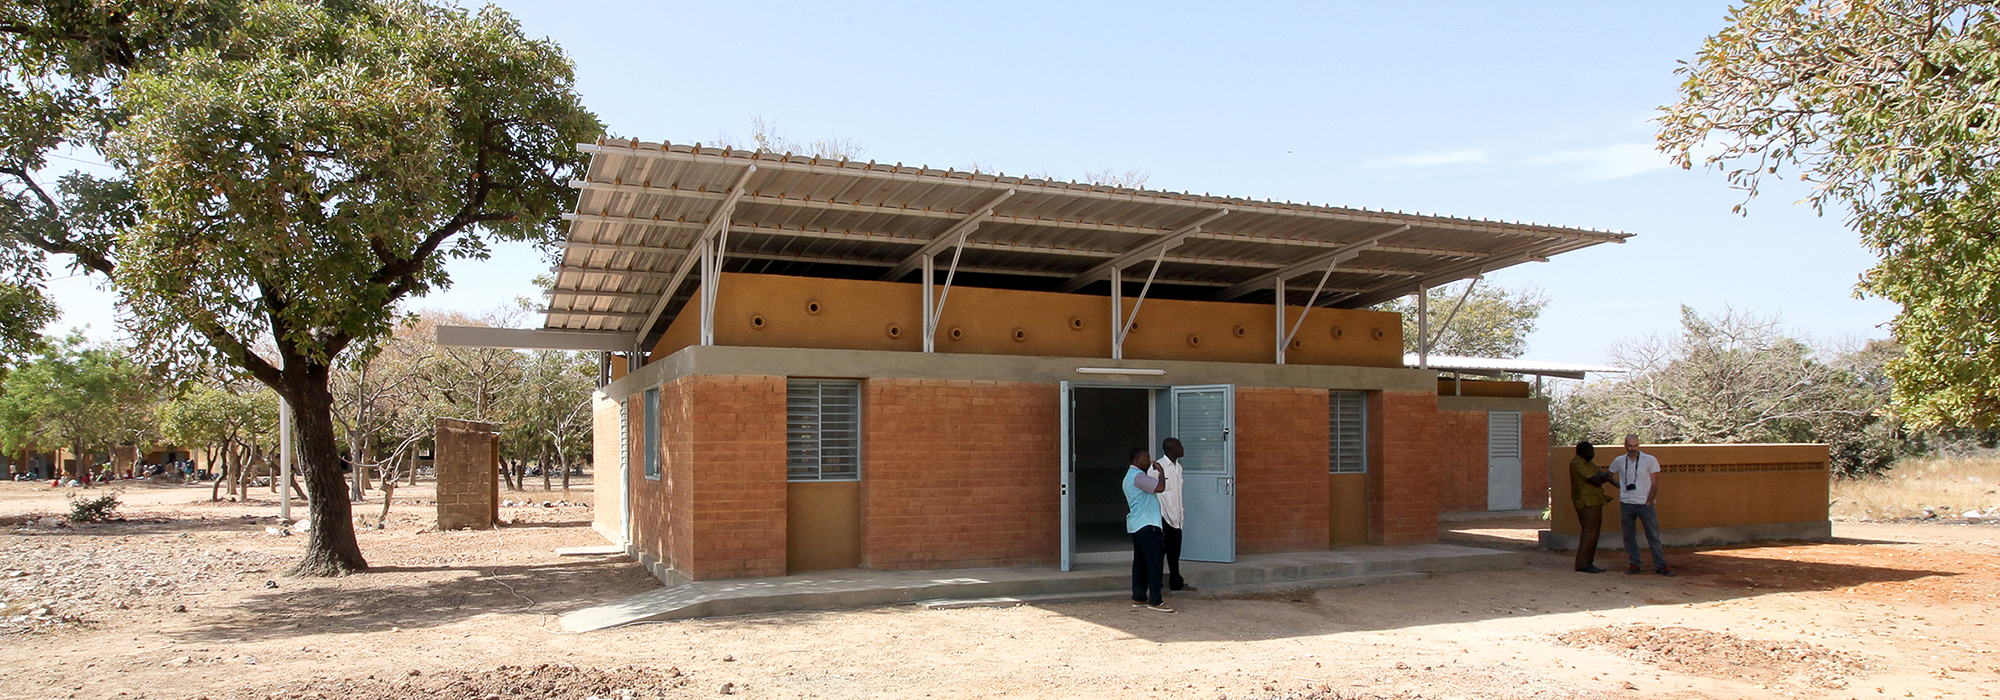 Refurbishment and extension of the Guiba Maternity clinic